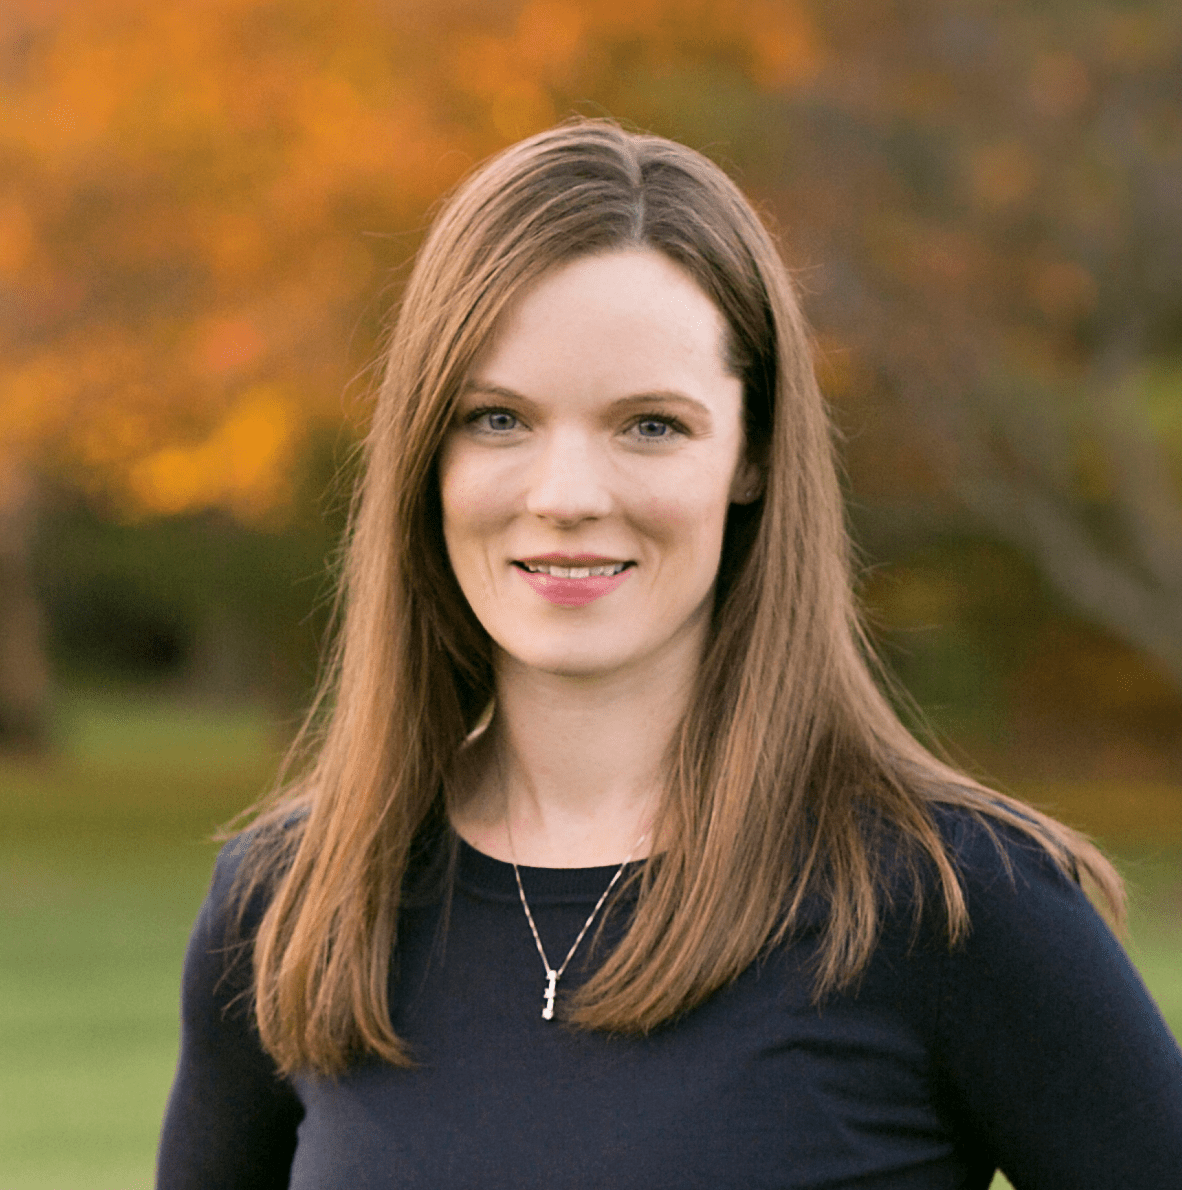 Vice chair of clinical affairs leads with confidence and builds connections through Physician MBA